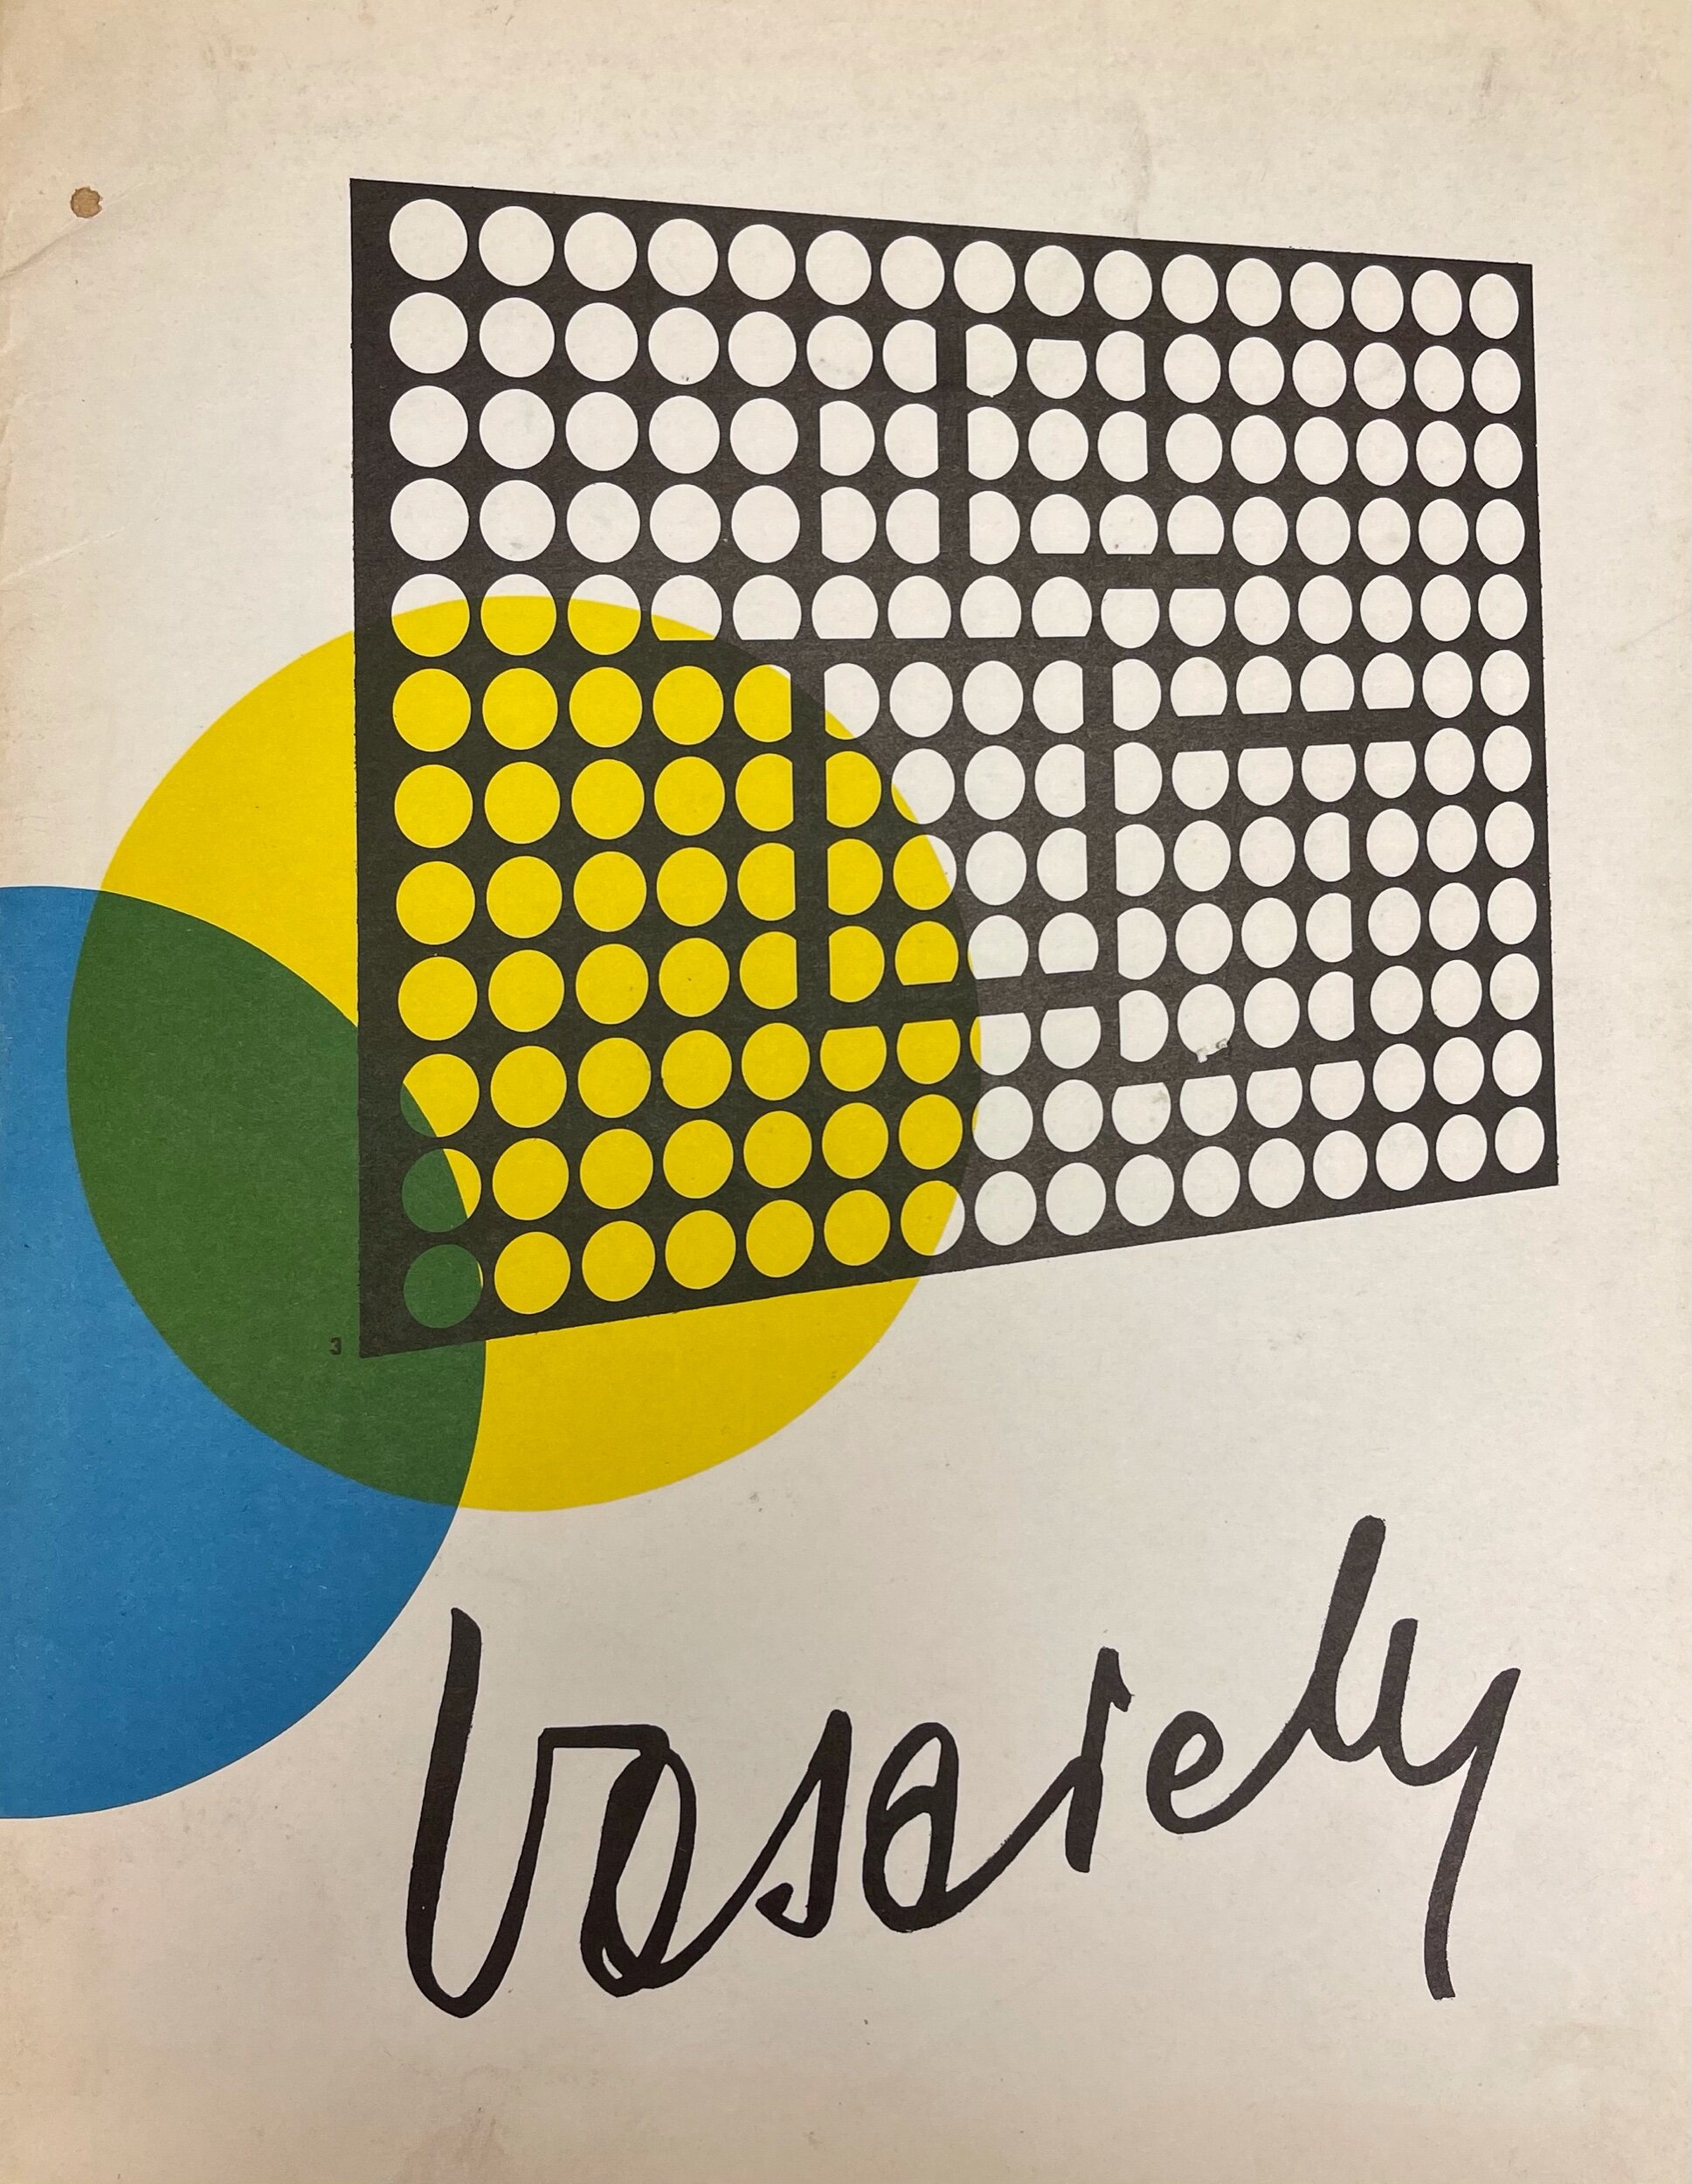 Brook Street Gallery catalogue from Vasarely's solo exhibition.